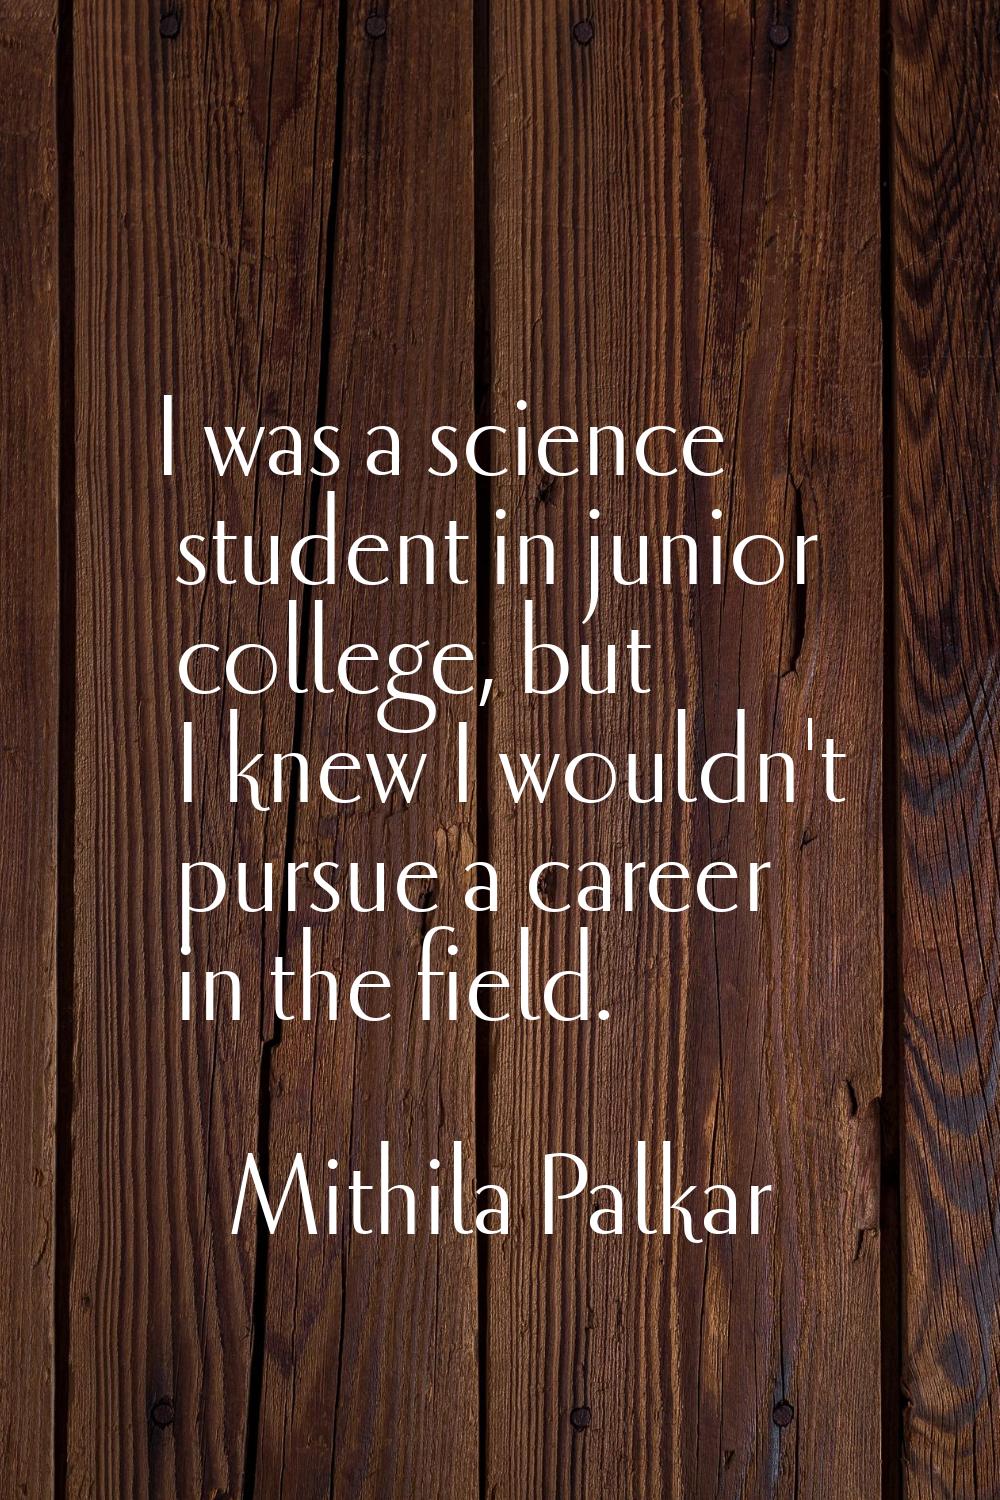 I was a science student in junior college, but I knew I wouldn't pursue a career in the field.